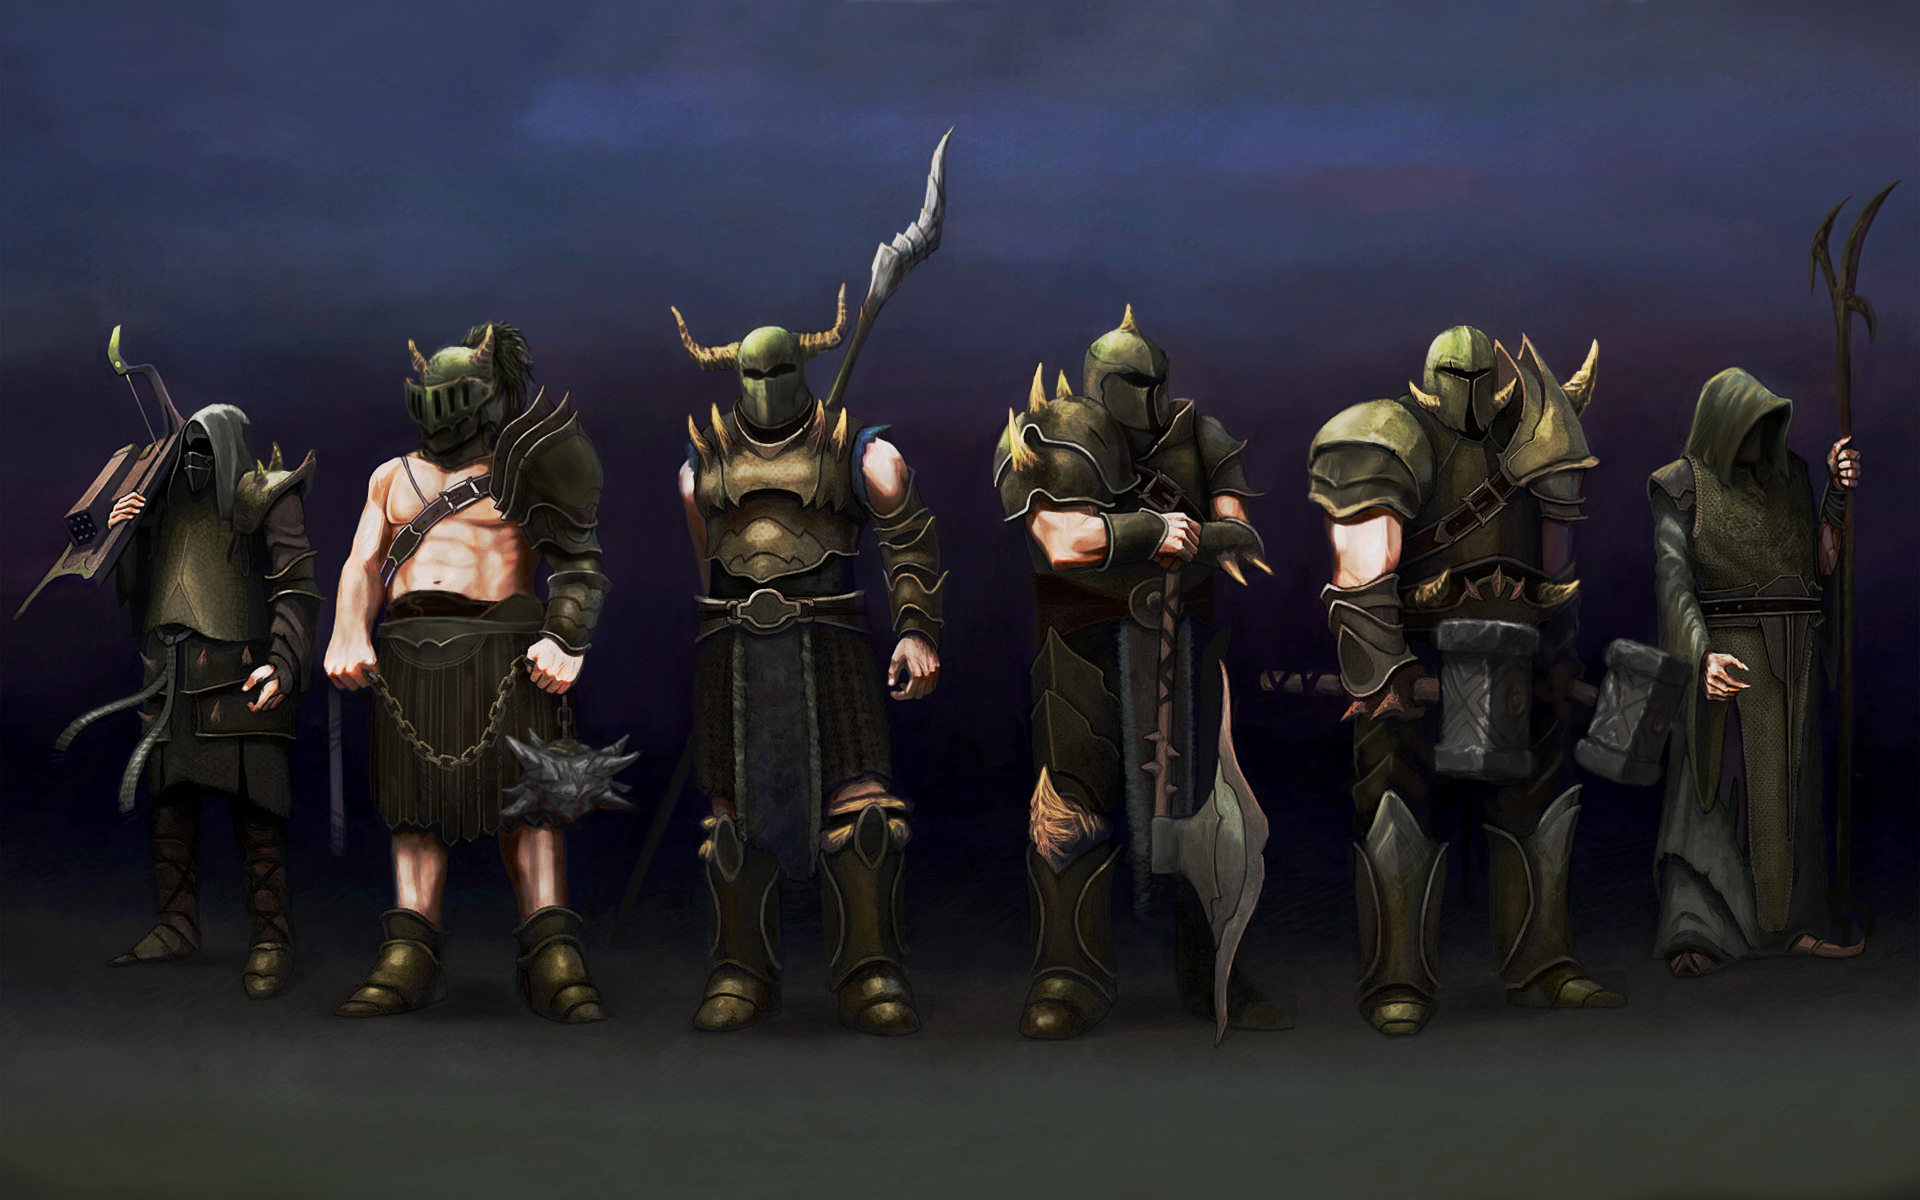 Free download Made a 1440p osrs wallpaper Thought id share for those